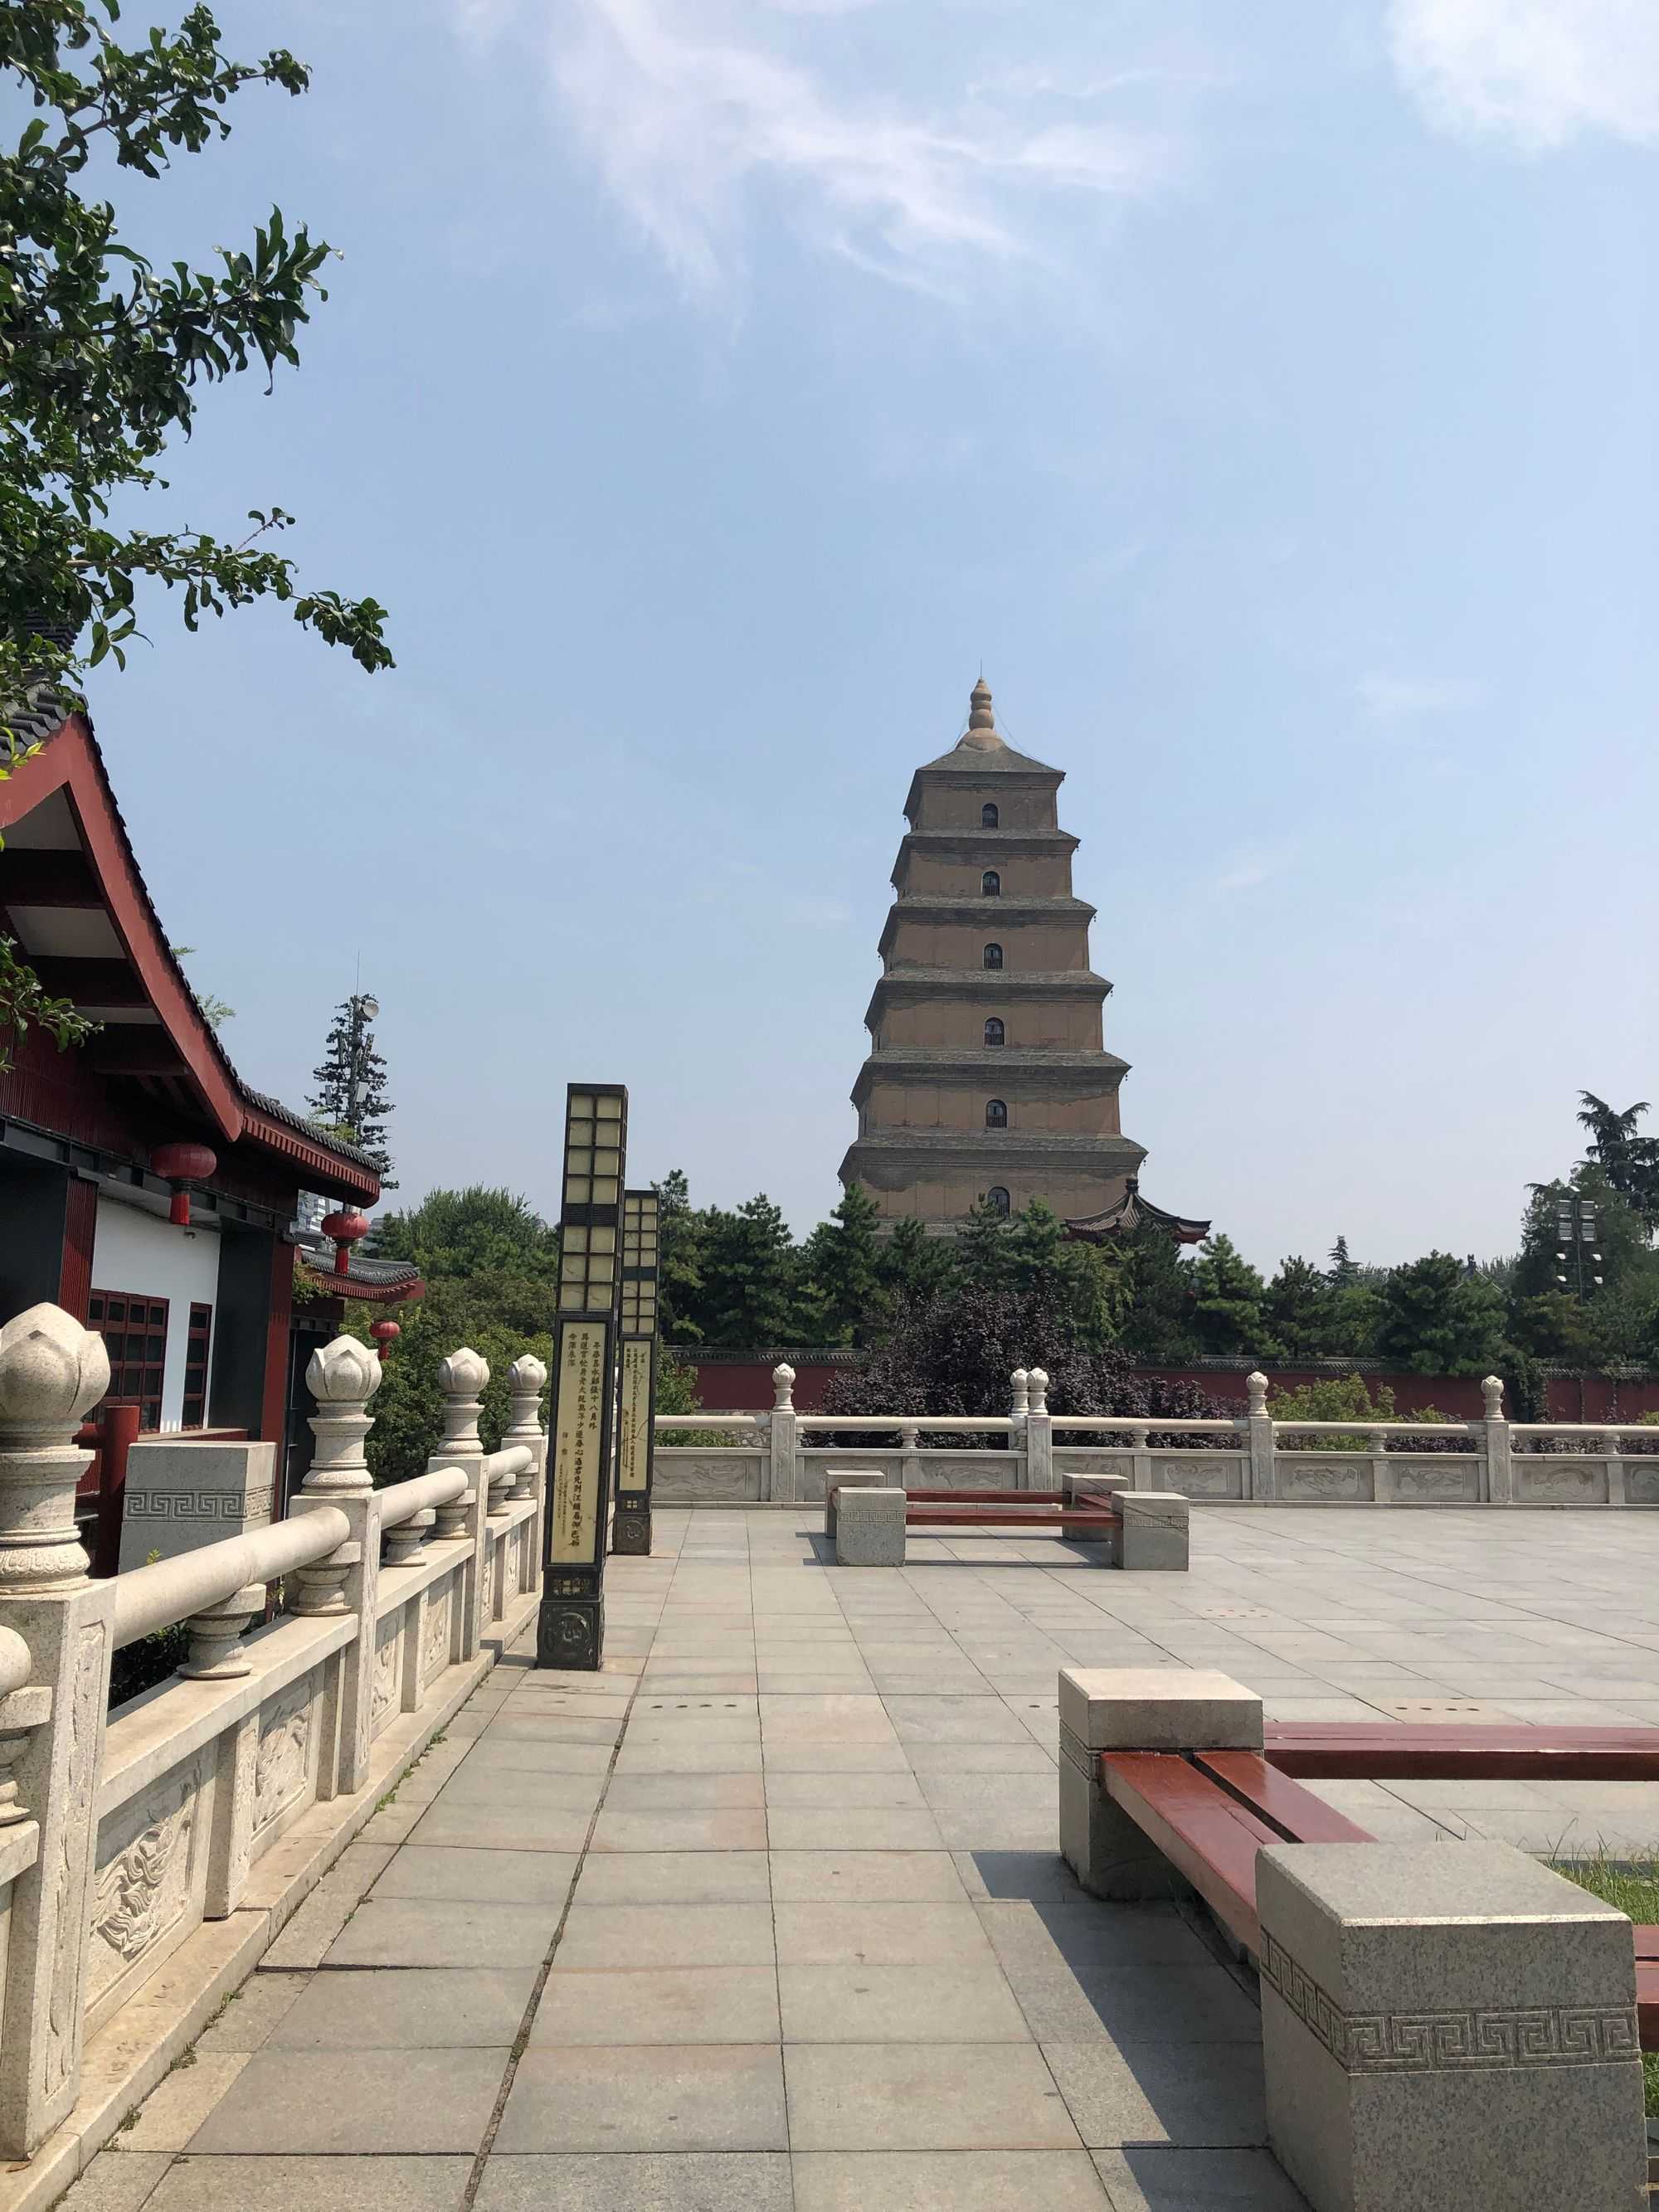 Giant Wild Goose Pagoda (大雁塔) (Image by author)